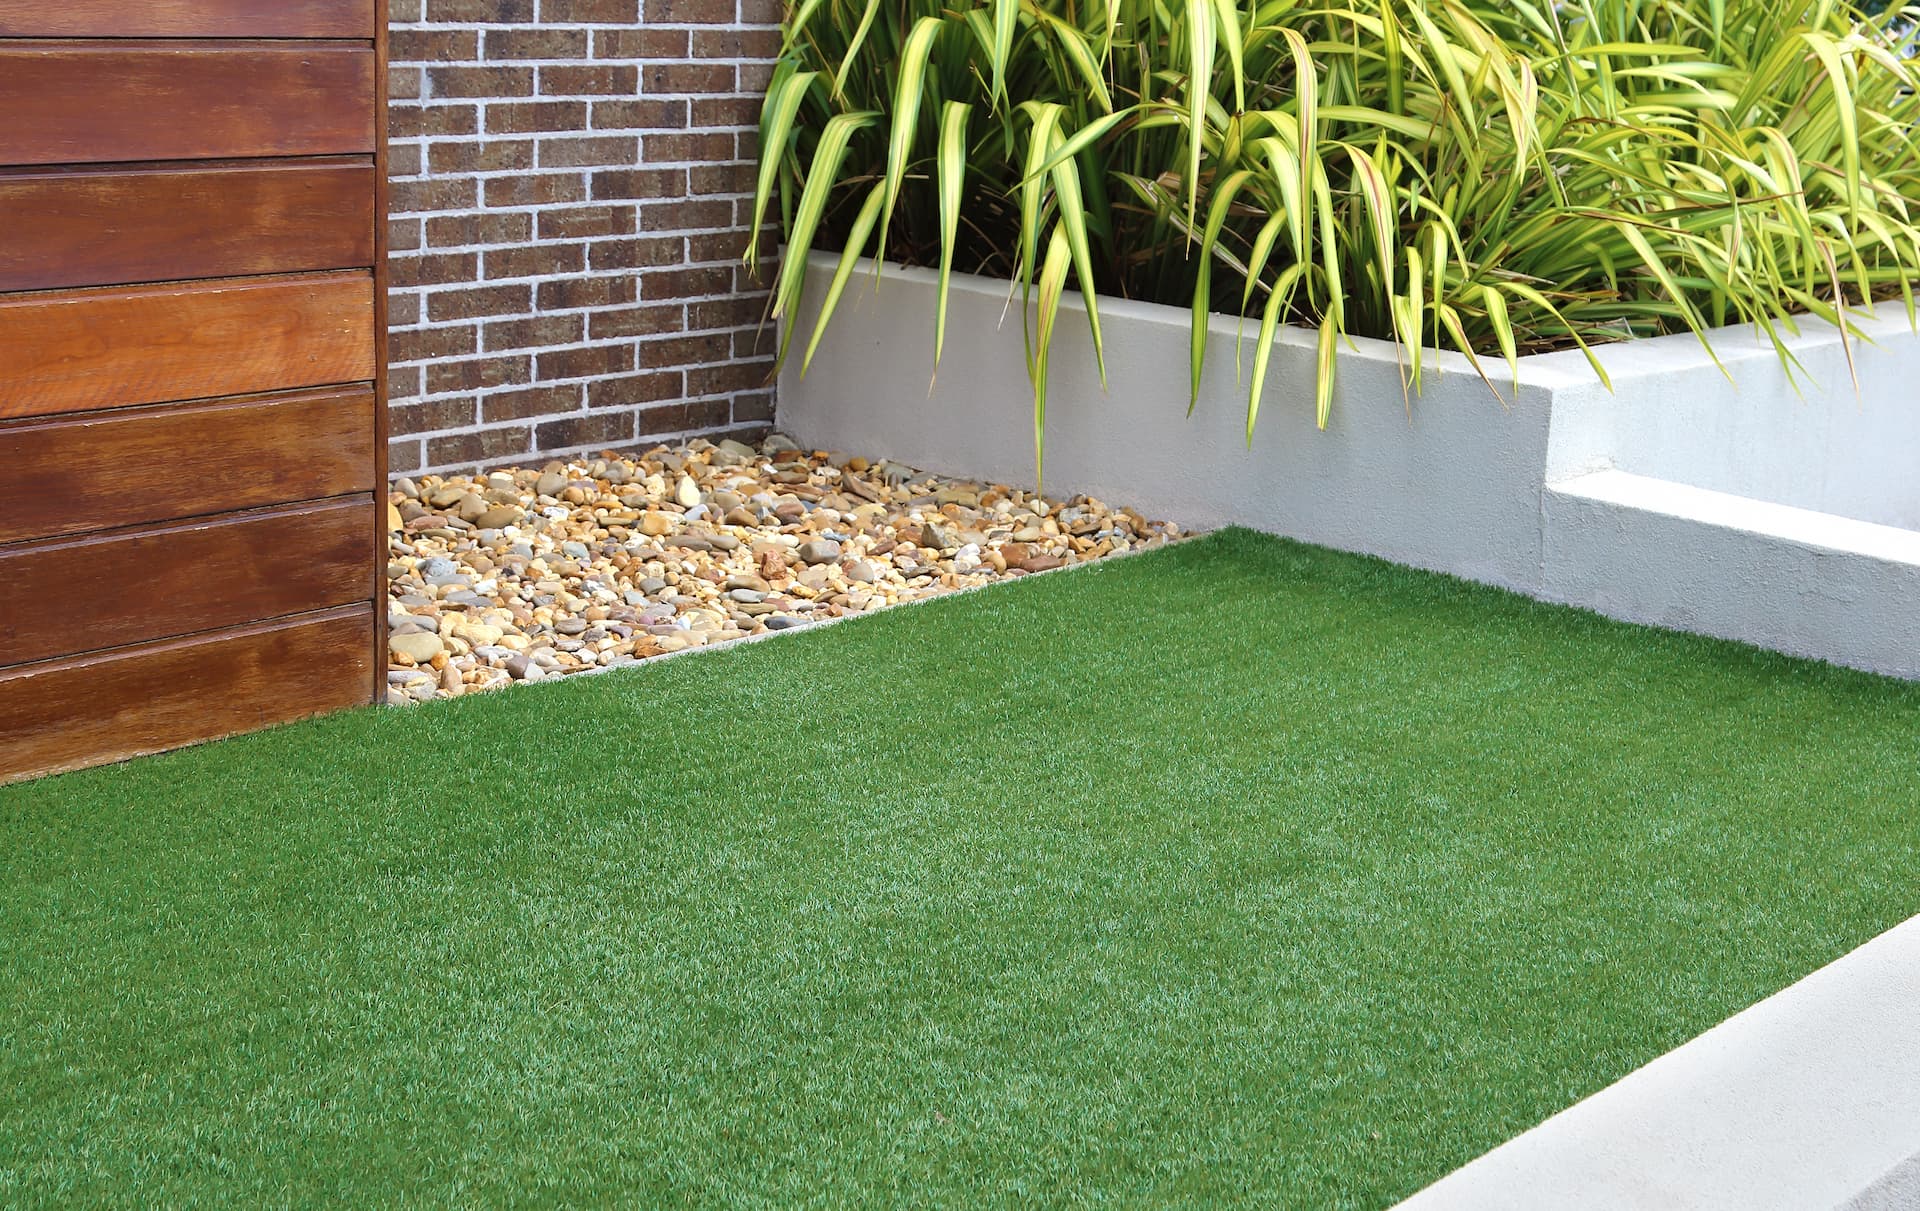 Licenced Artificial Grass & Turf services in Bredbury